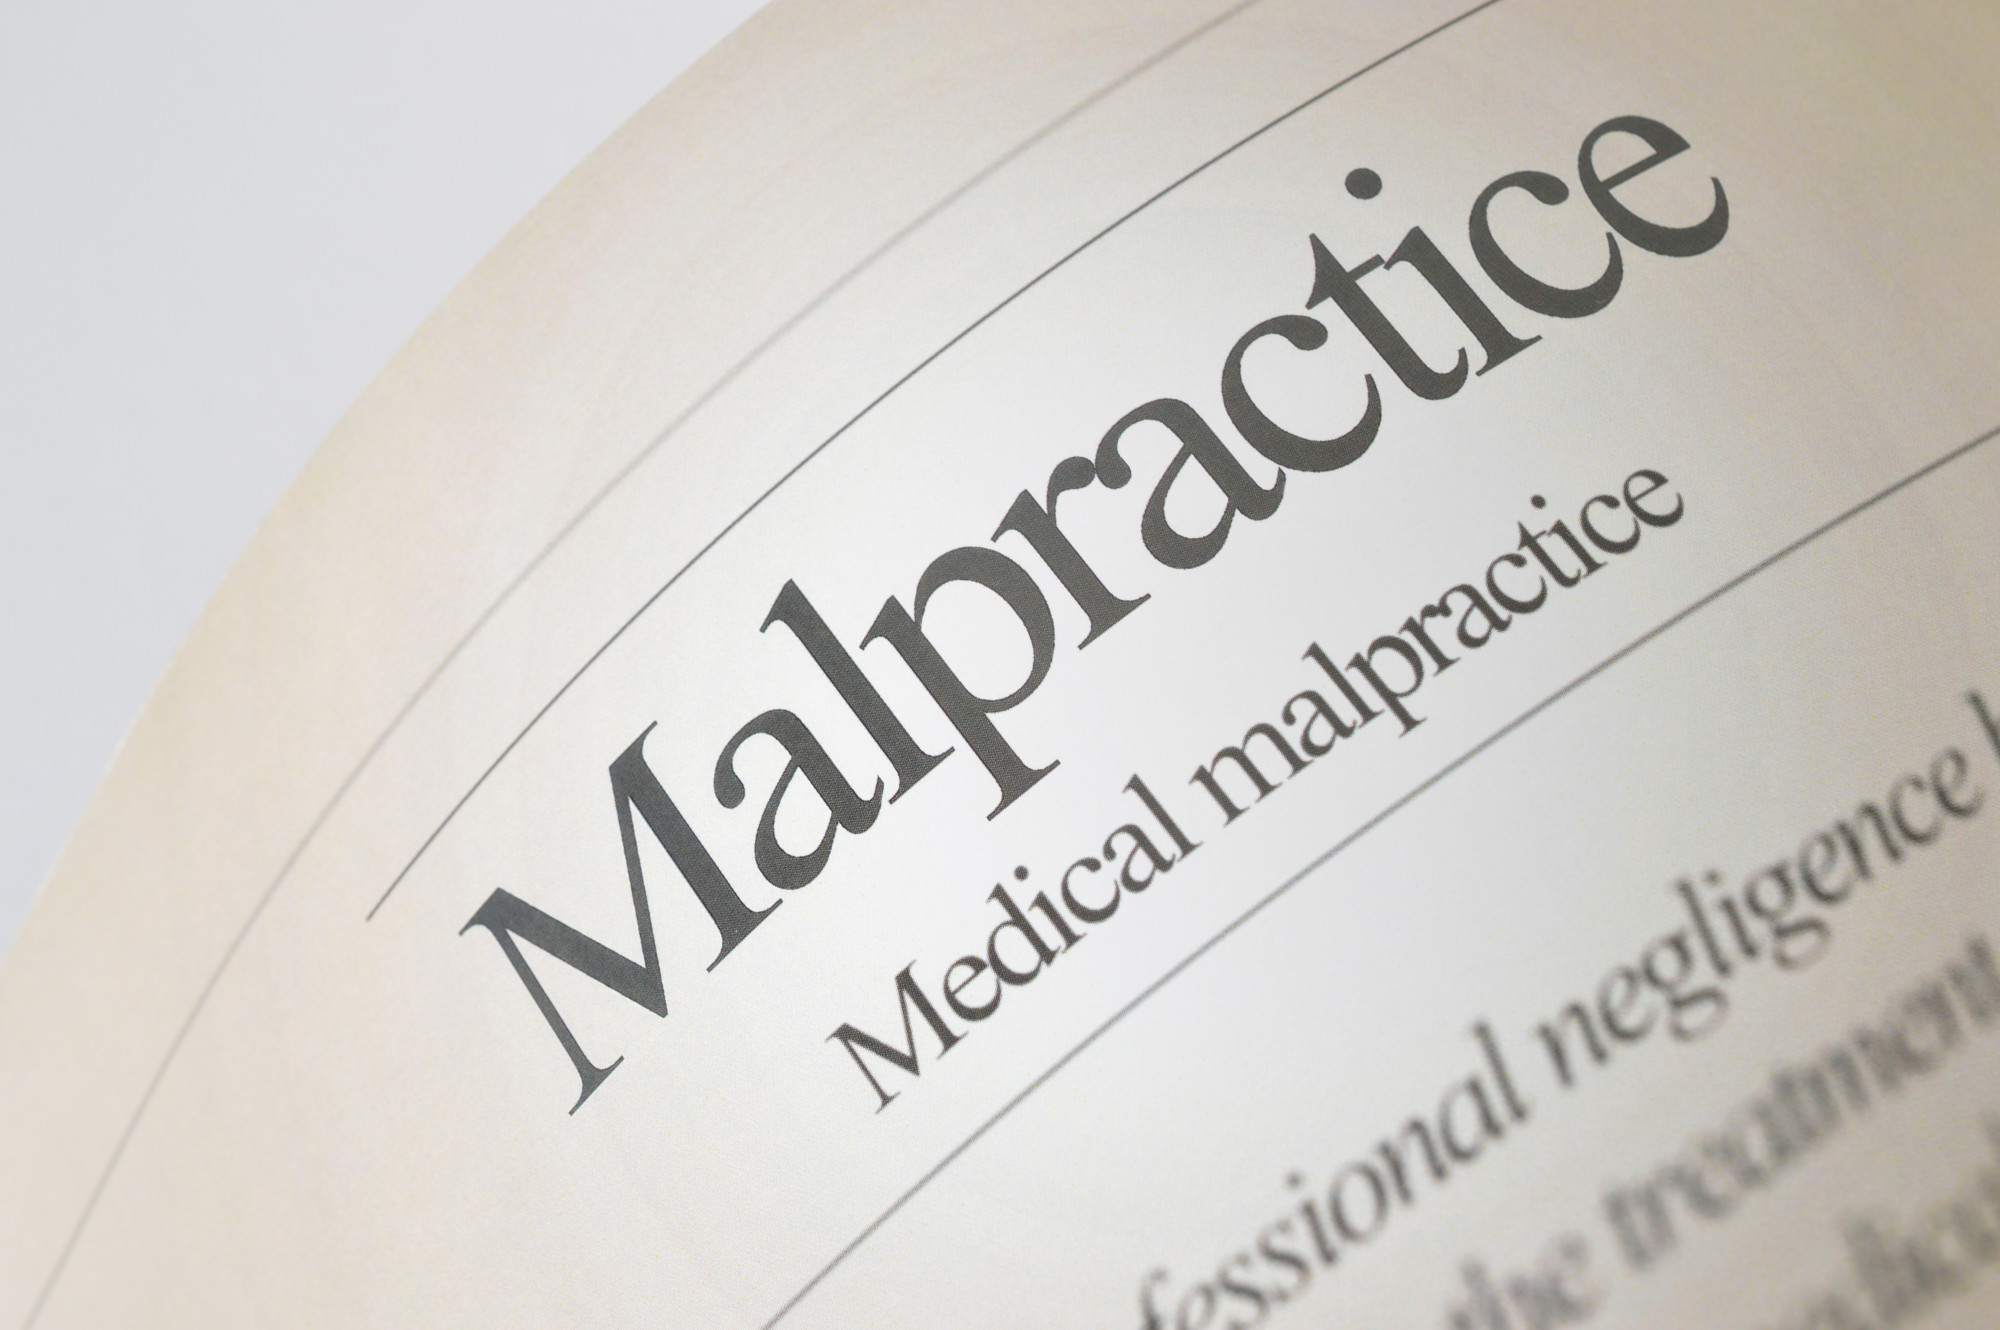 When Can You Expect Your Medical Malpractice Settlement After Filing?